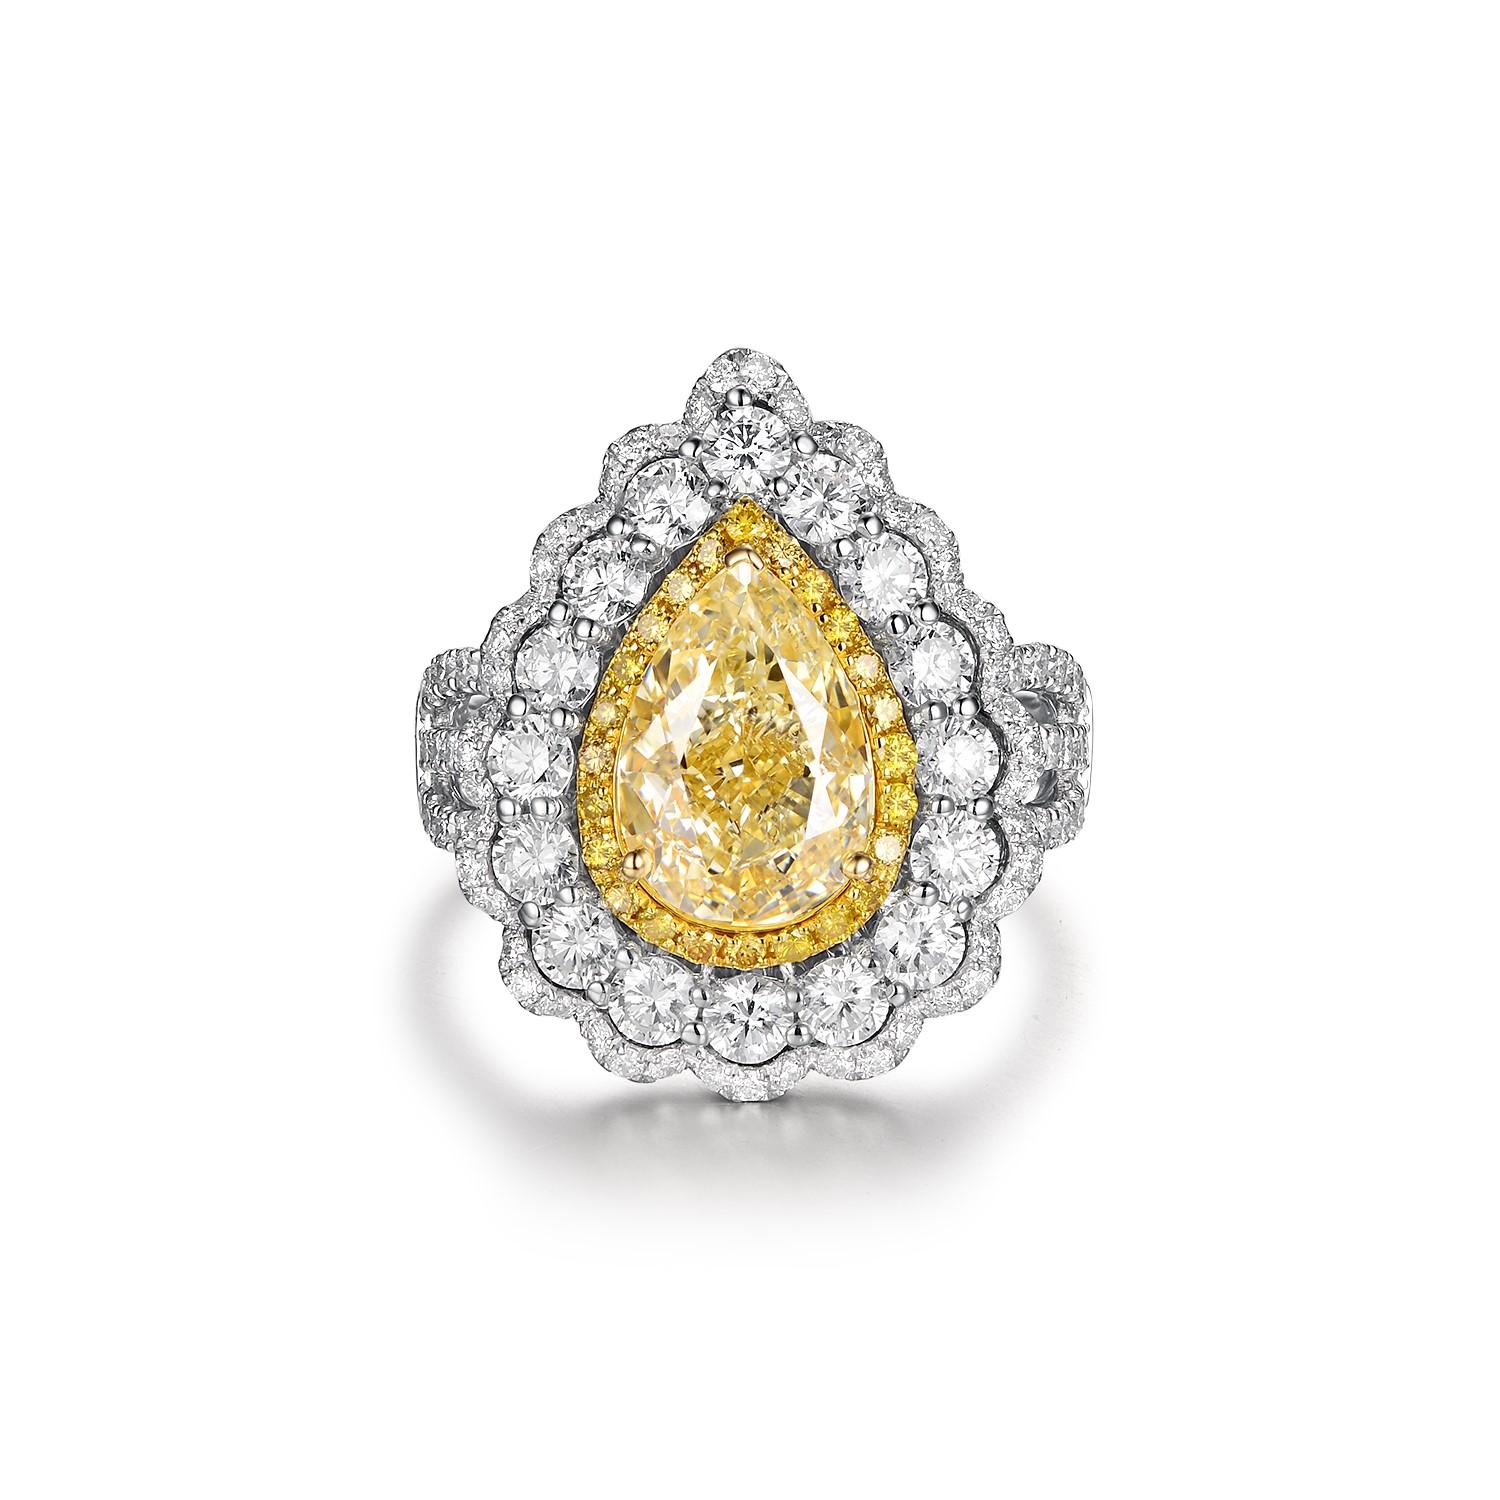 Presenting a truly exceptional piece, this Yellow Diamond Ring is an exquisite expression of luxury and beauty. The centerpiece of this ring is a remarkable IGI certified 2.51 carat VS1 N color yellow diamond, radiating a captivating hue and a